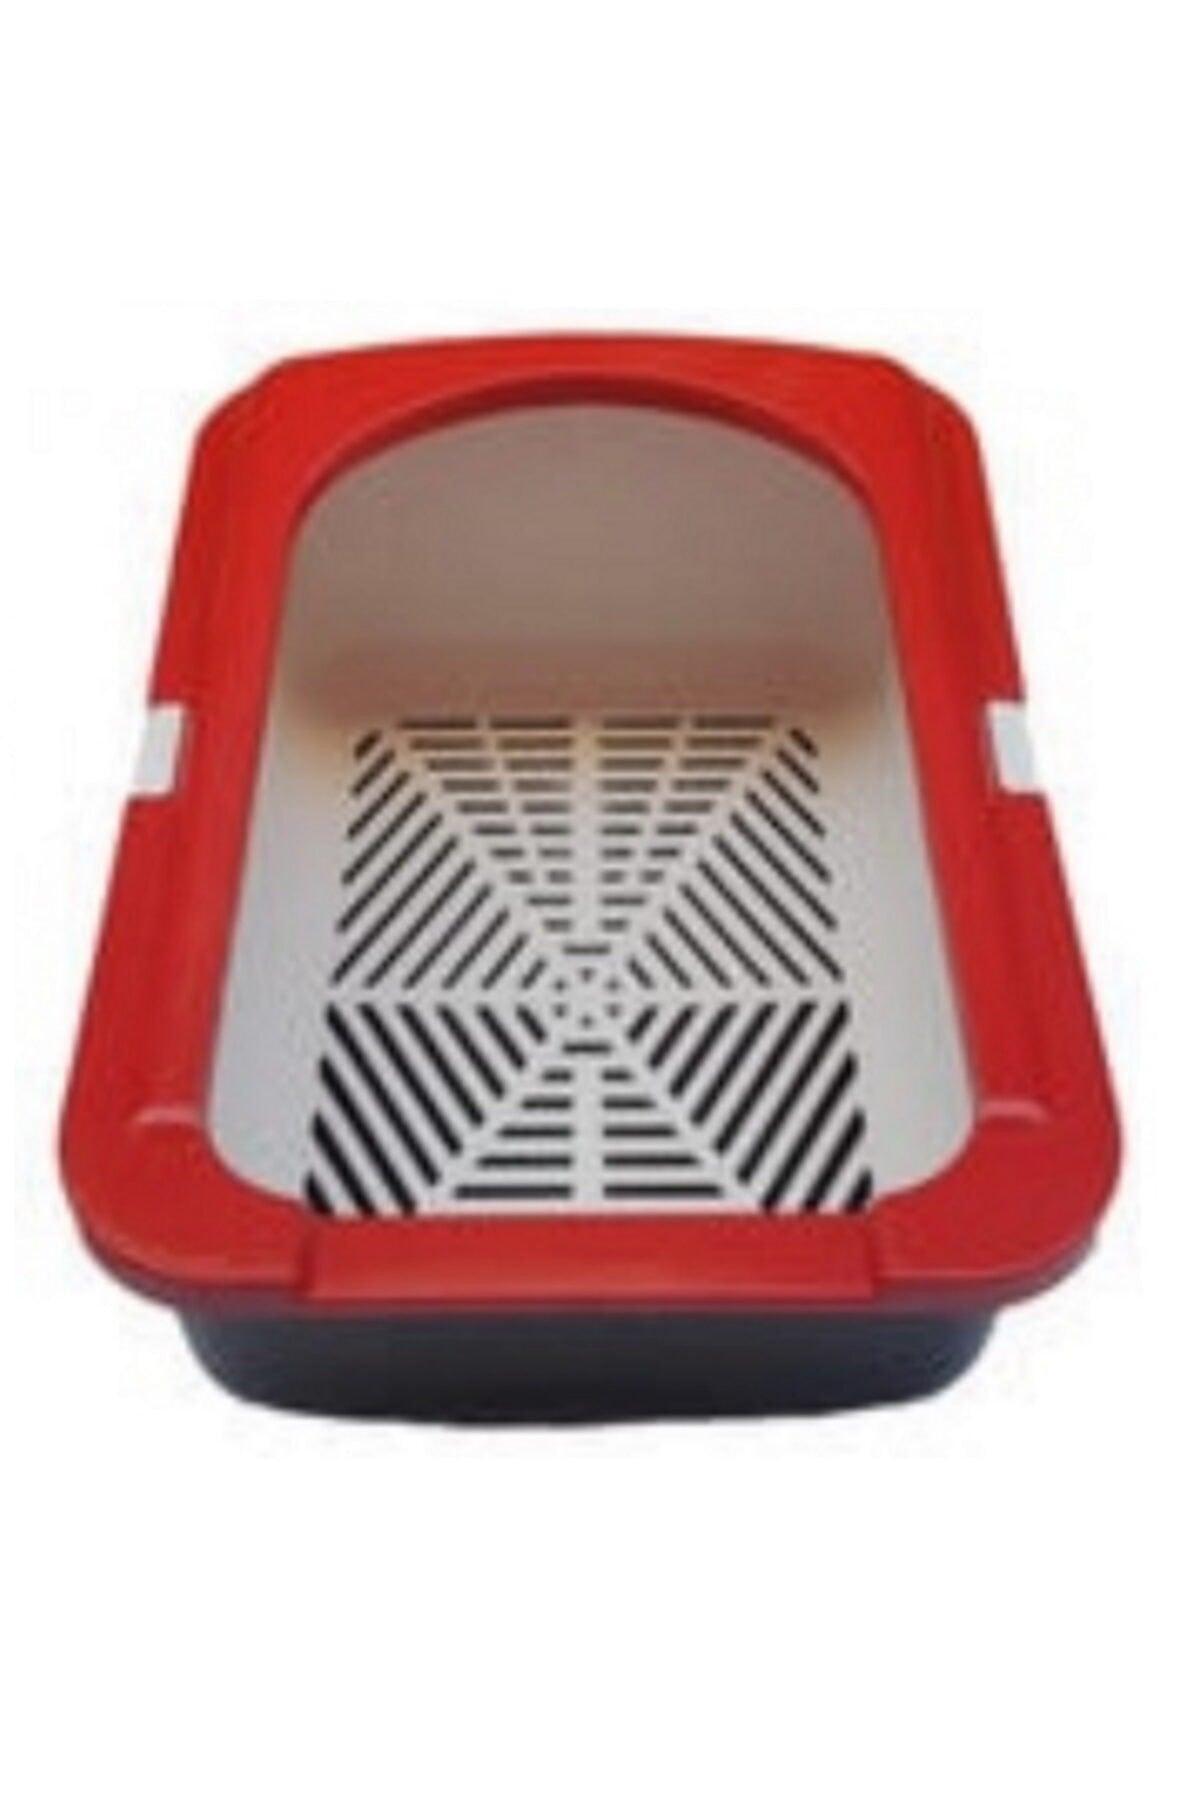 Cat Sieve Toilet Tray Red 5 lt Sand +